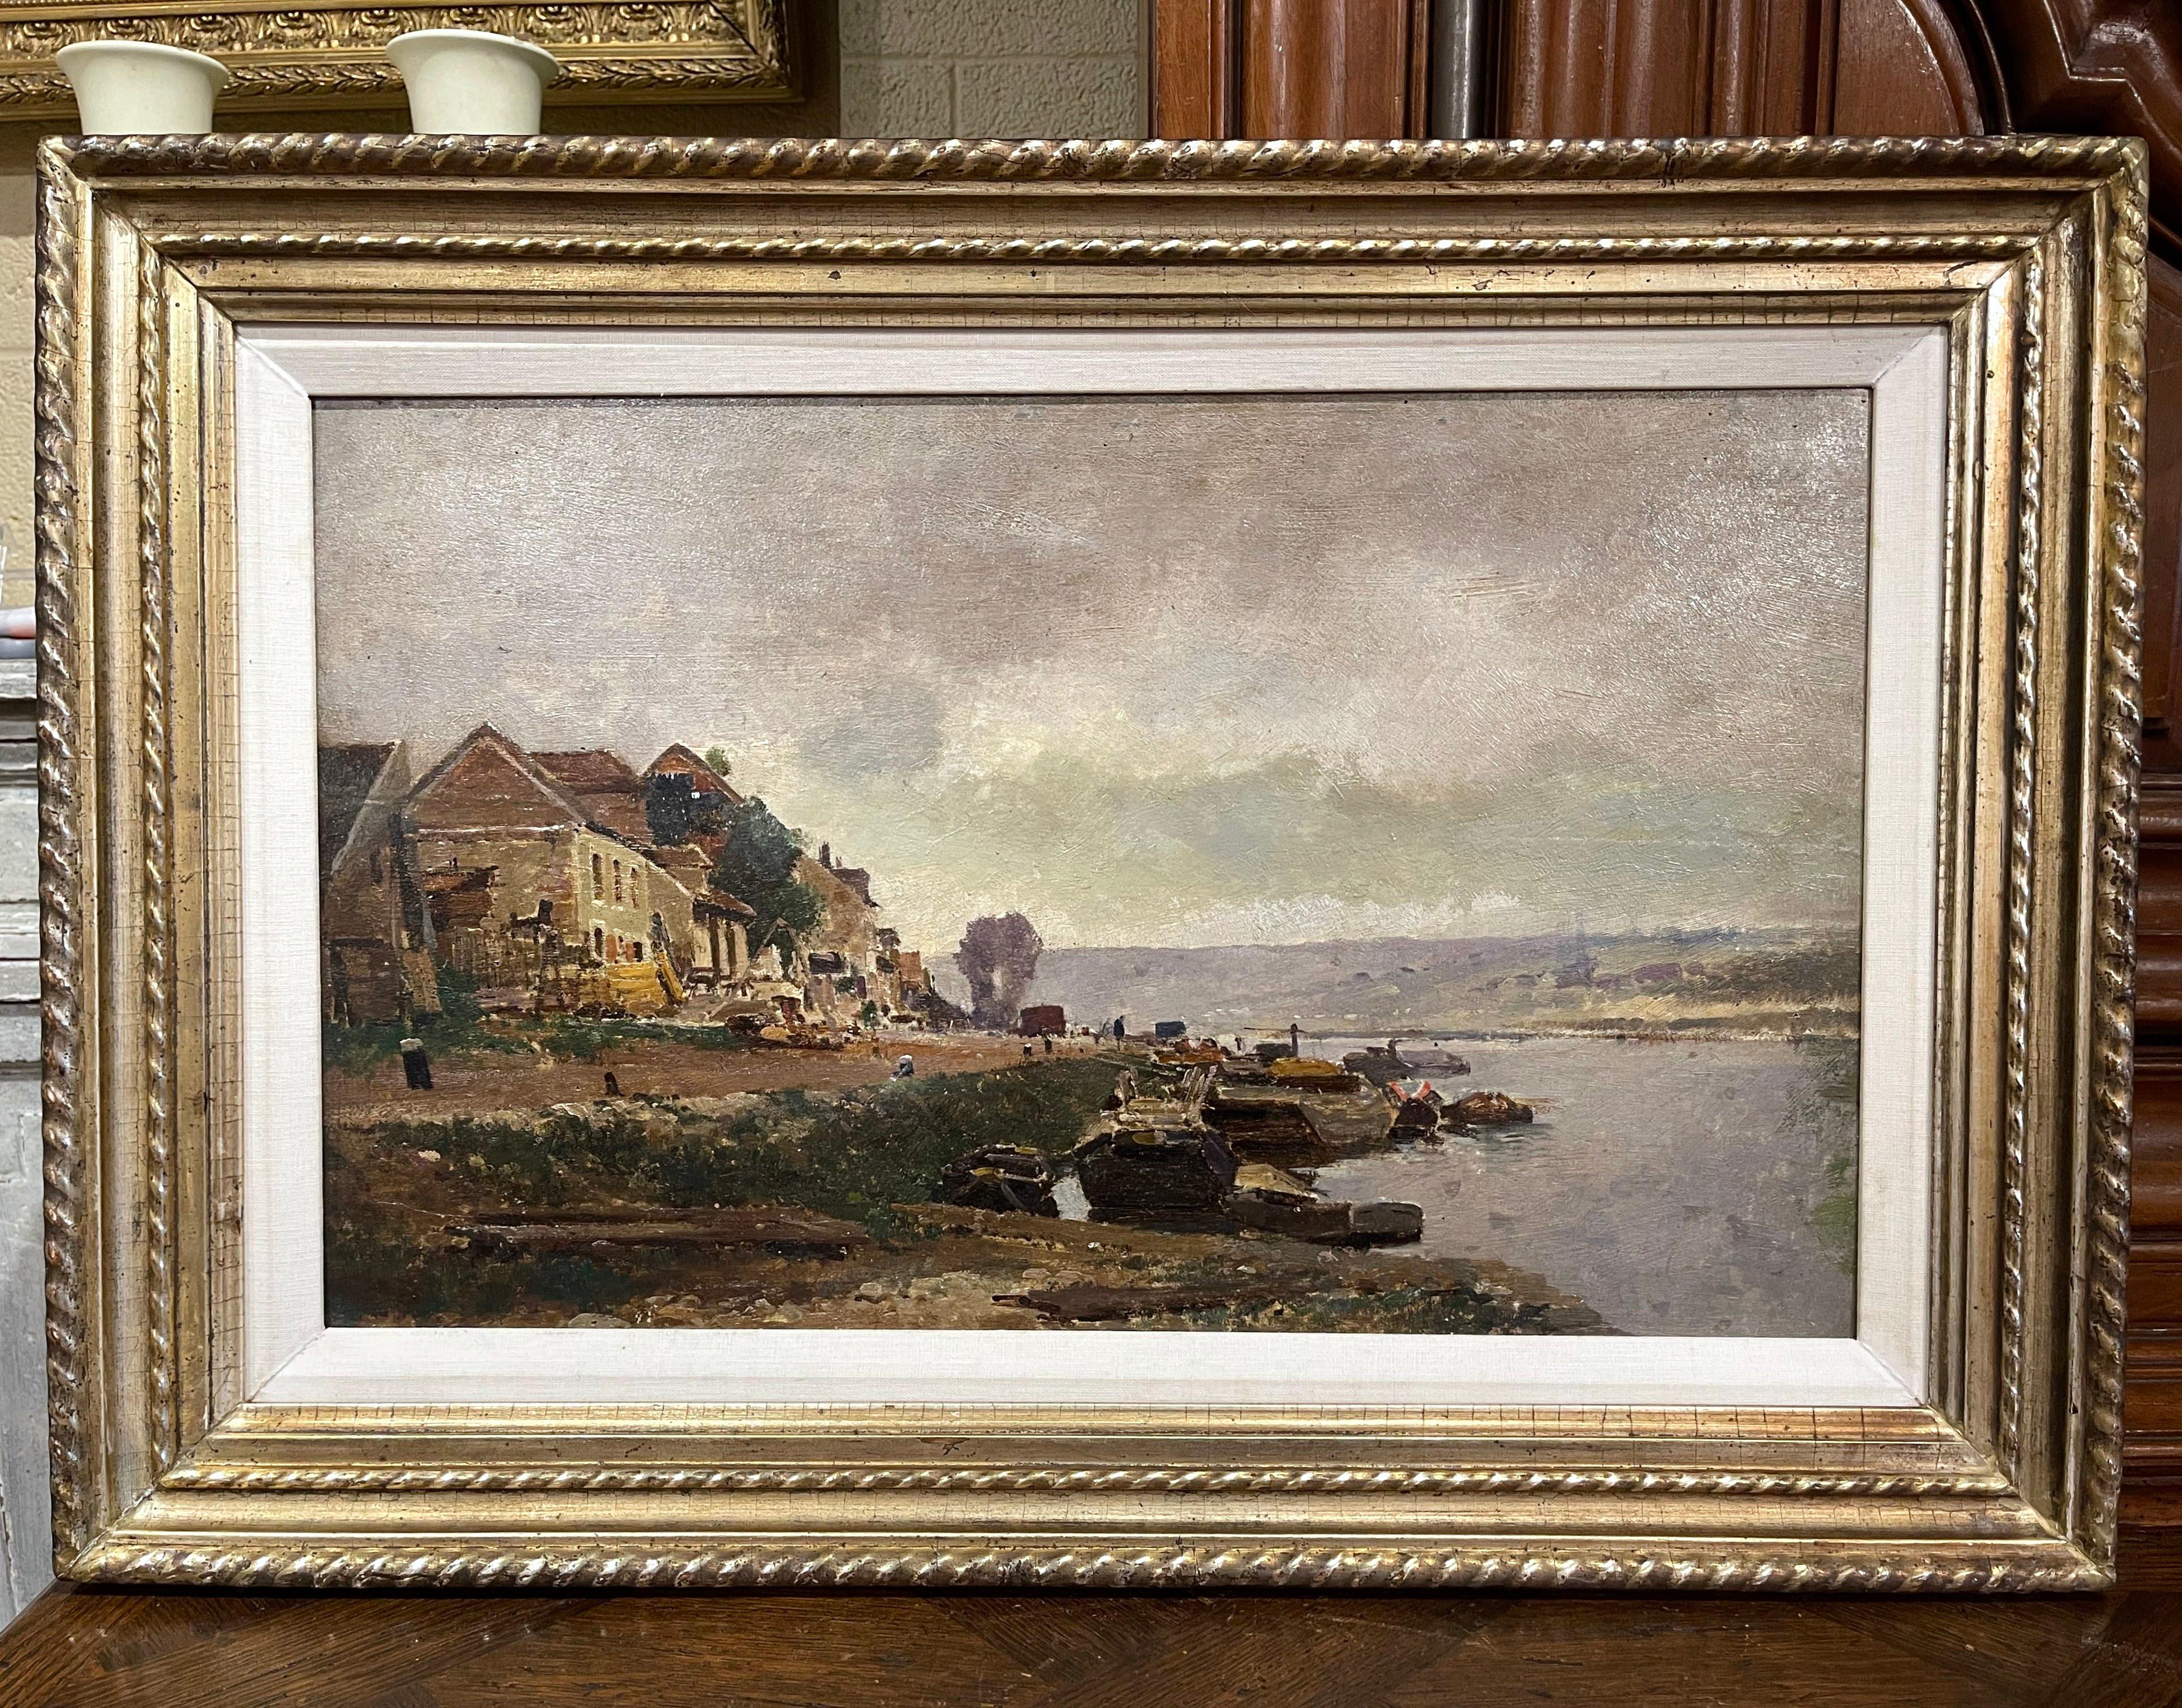 19th Century Framed Landscape Oil Painting on Board Signed E. Galien-Laloue For Sale 1